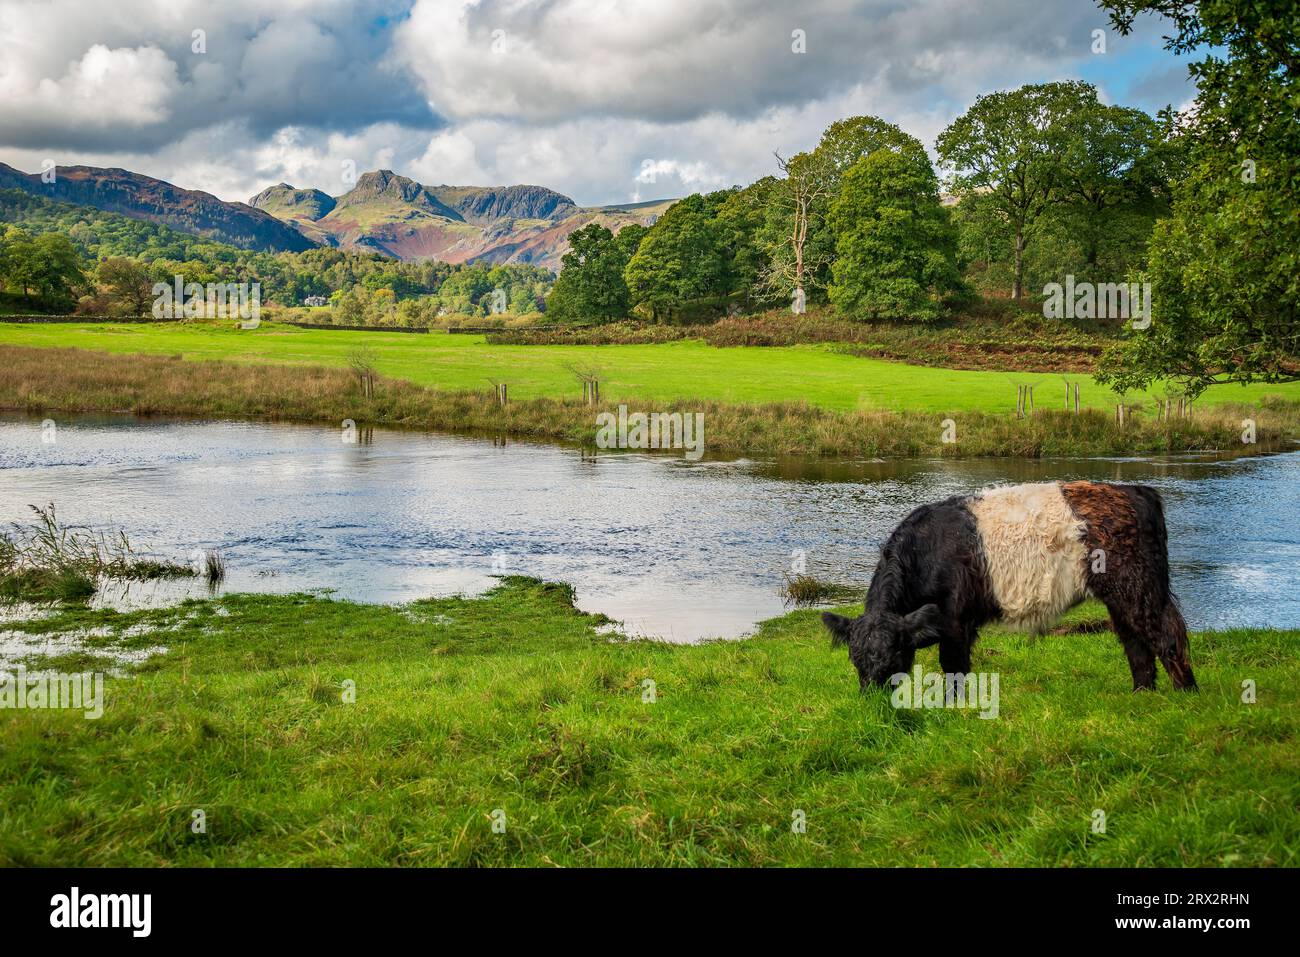 Tranquill scene by the Elter Water in the Lake District National Park towards the Langdale Pikes with a belted galloway cow gently grazing. Stock Photo